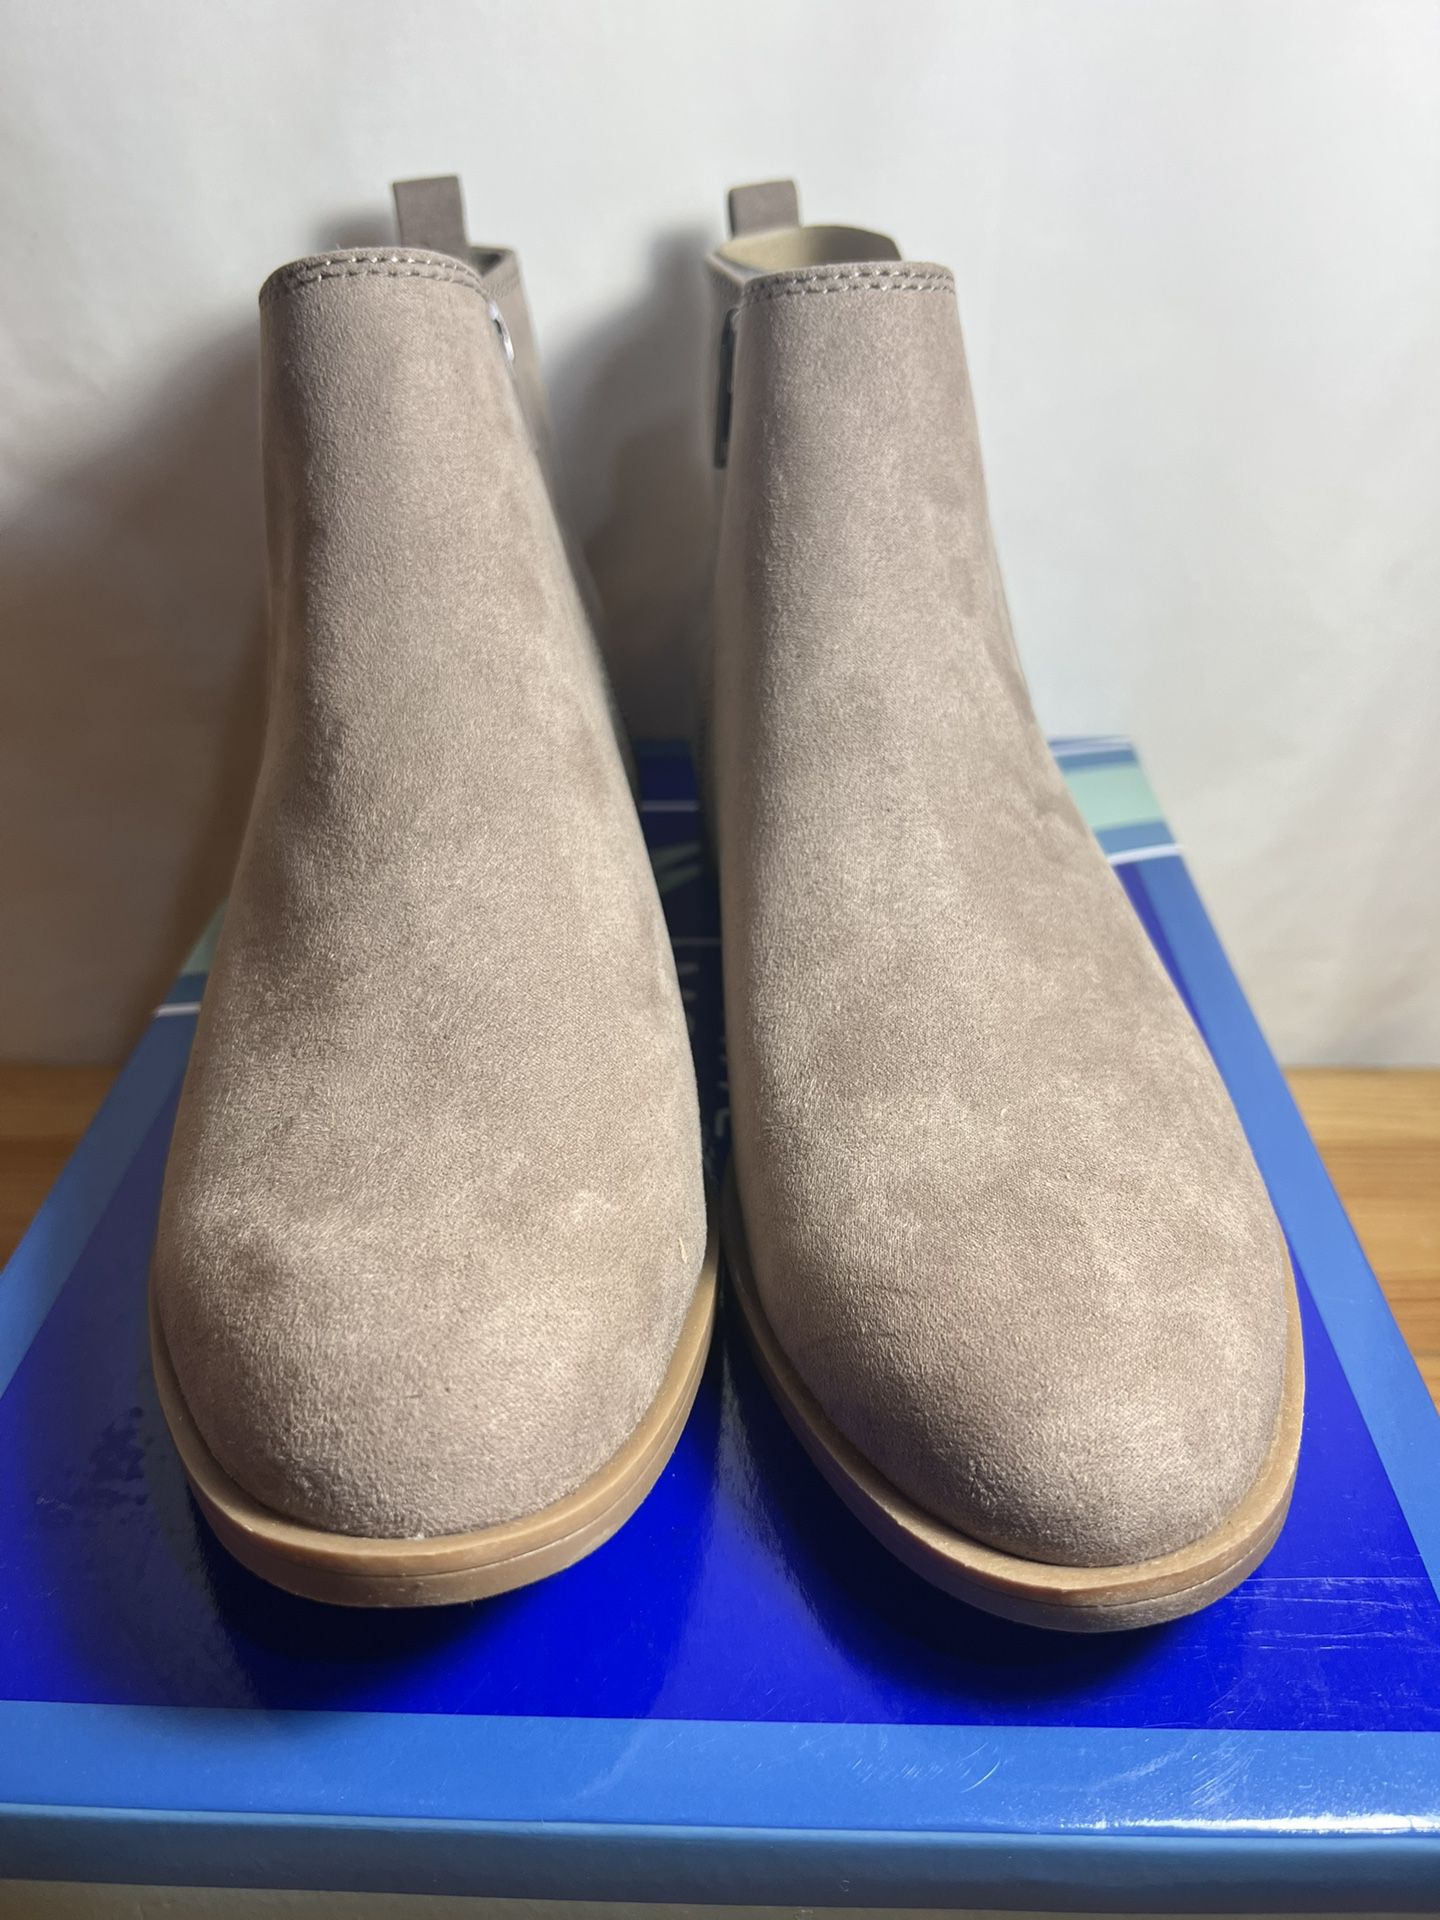 WHITE MOUNTAIN Shoes Women's Gabby Boot, Taupe/Fabric, 8 M Brand New